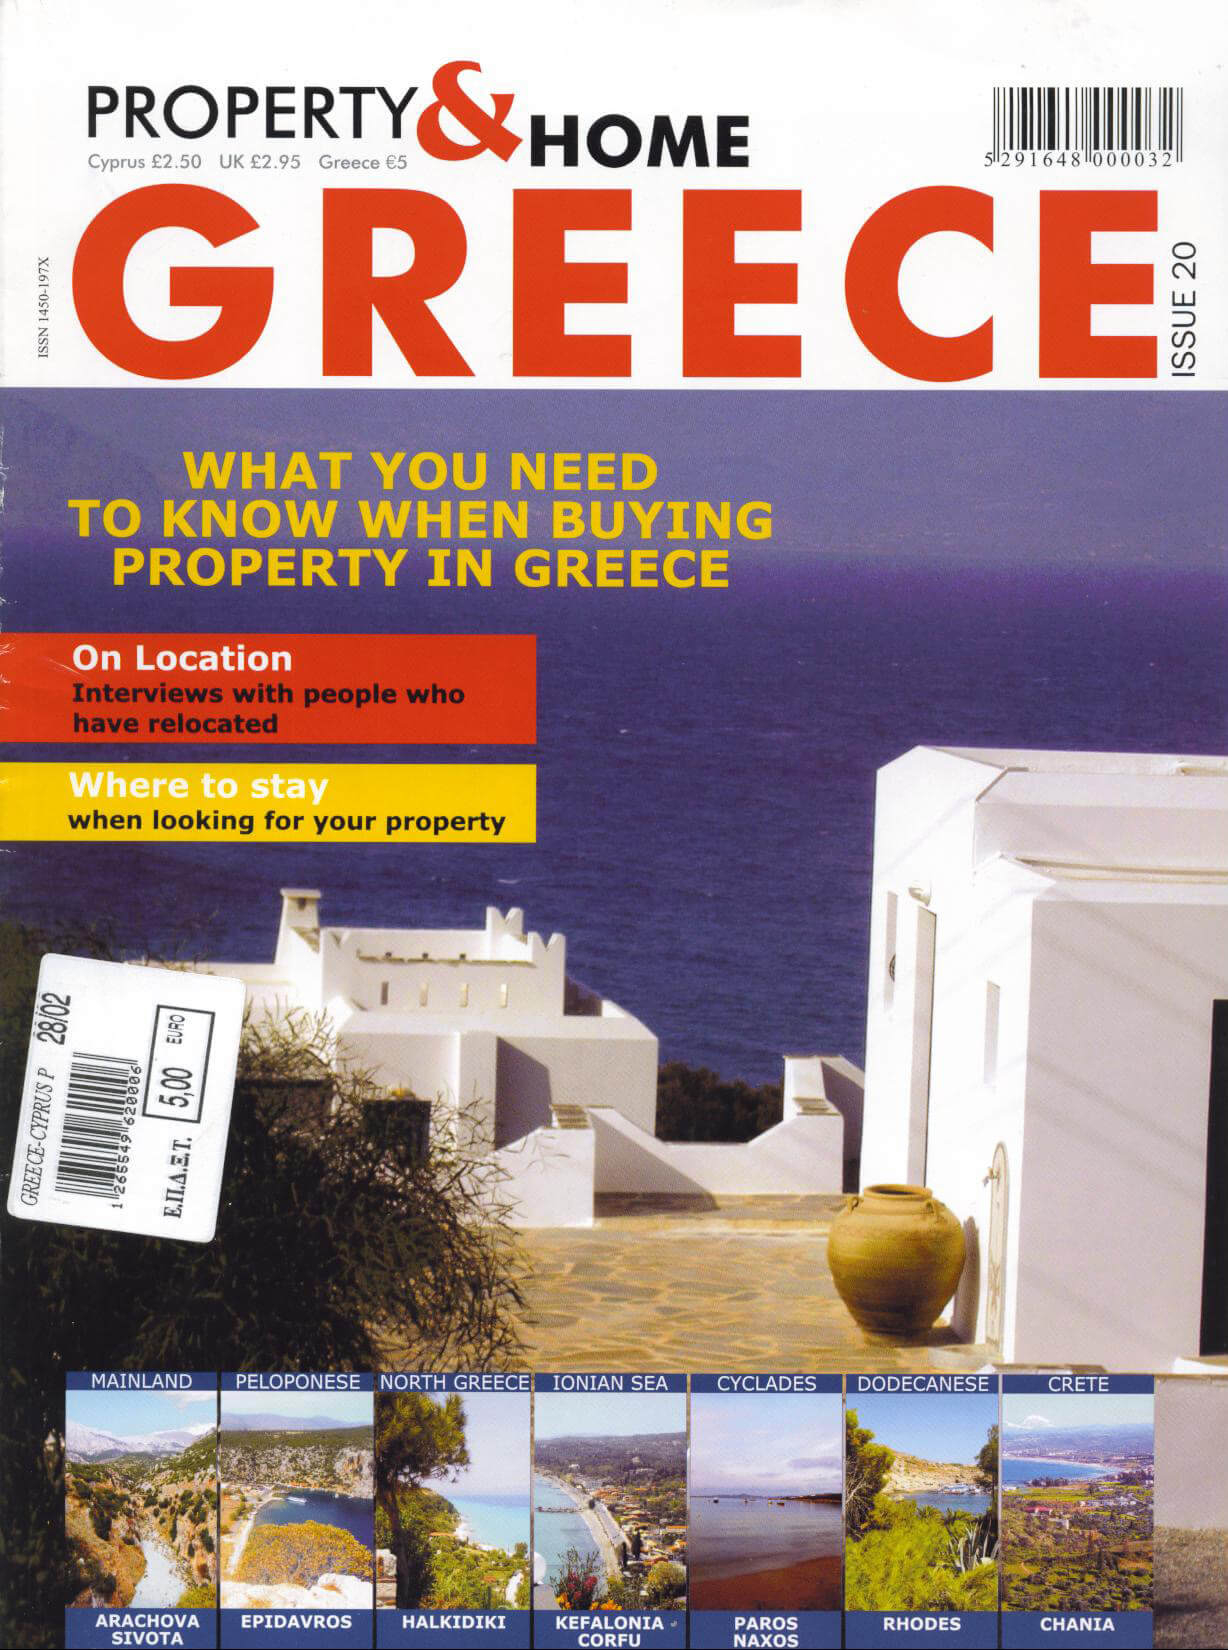 2005_ROU ESTATE_property&home greece_issue 20 dec 2005_cover LOW RES